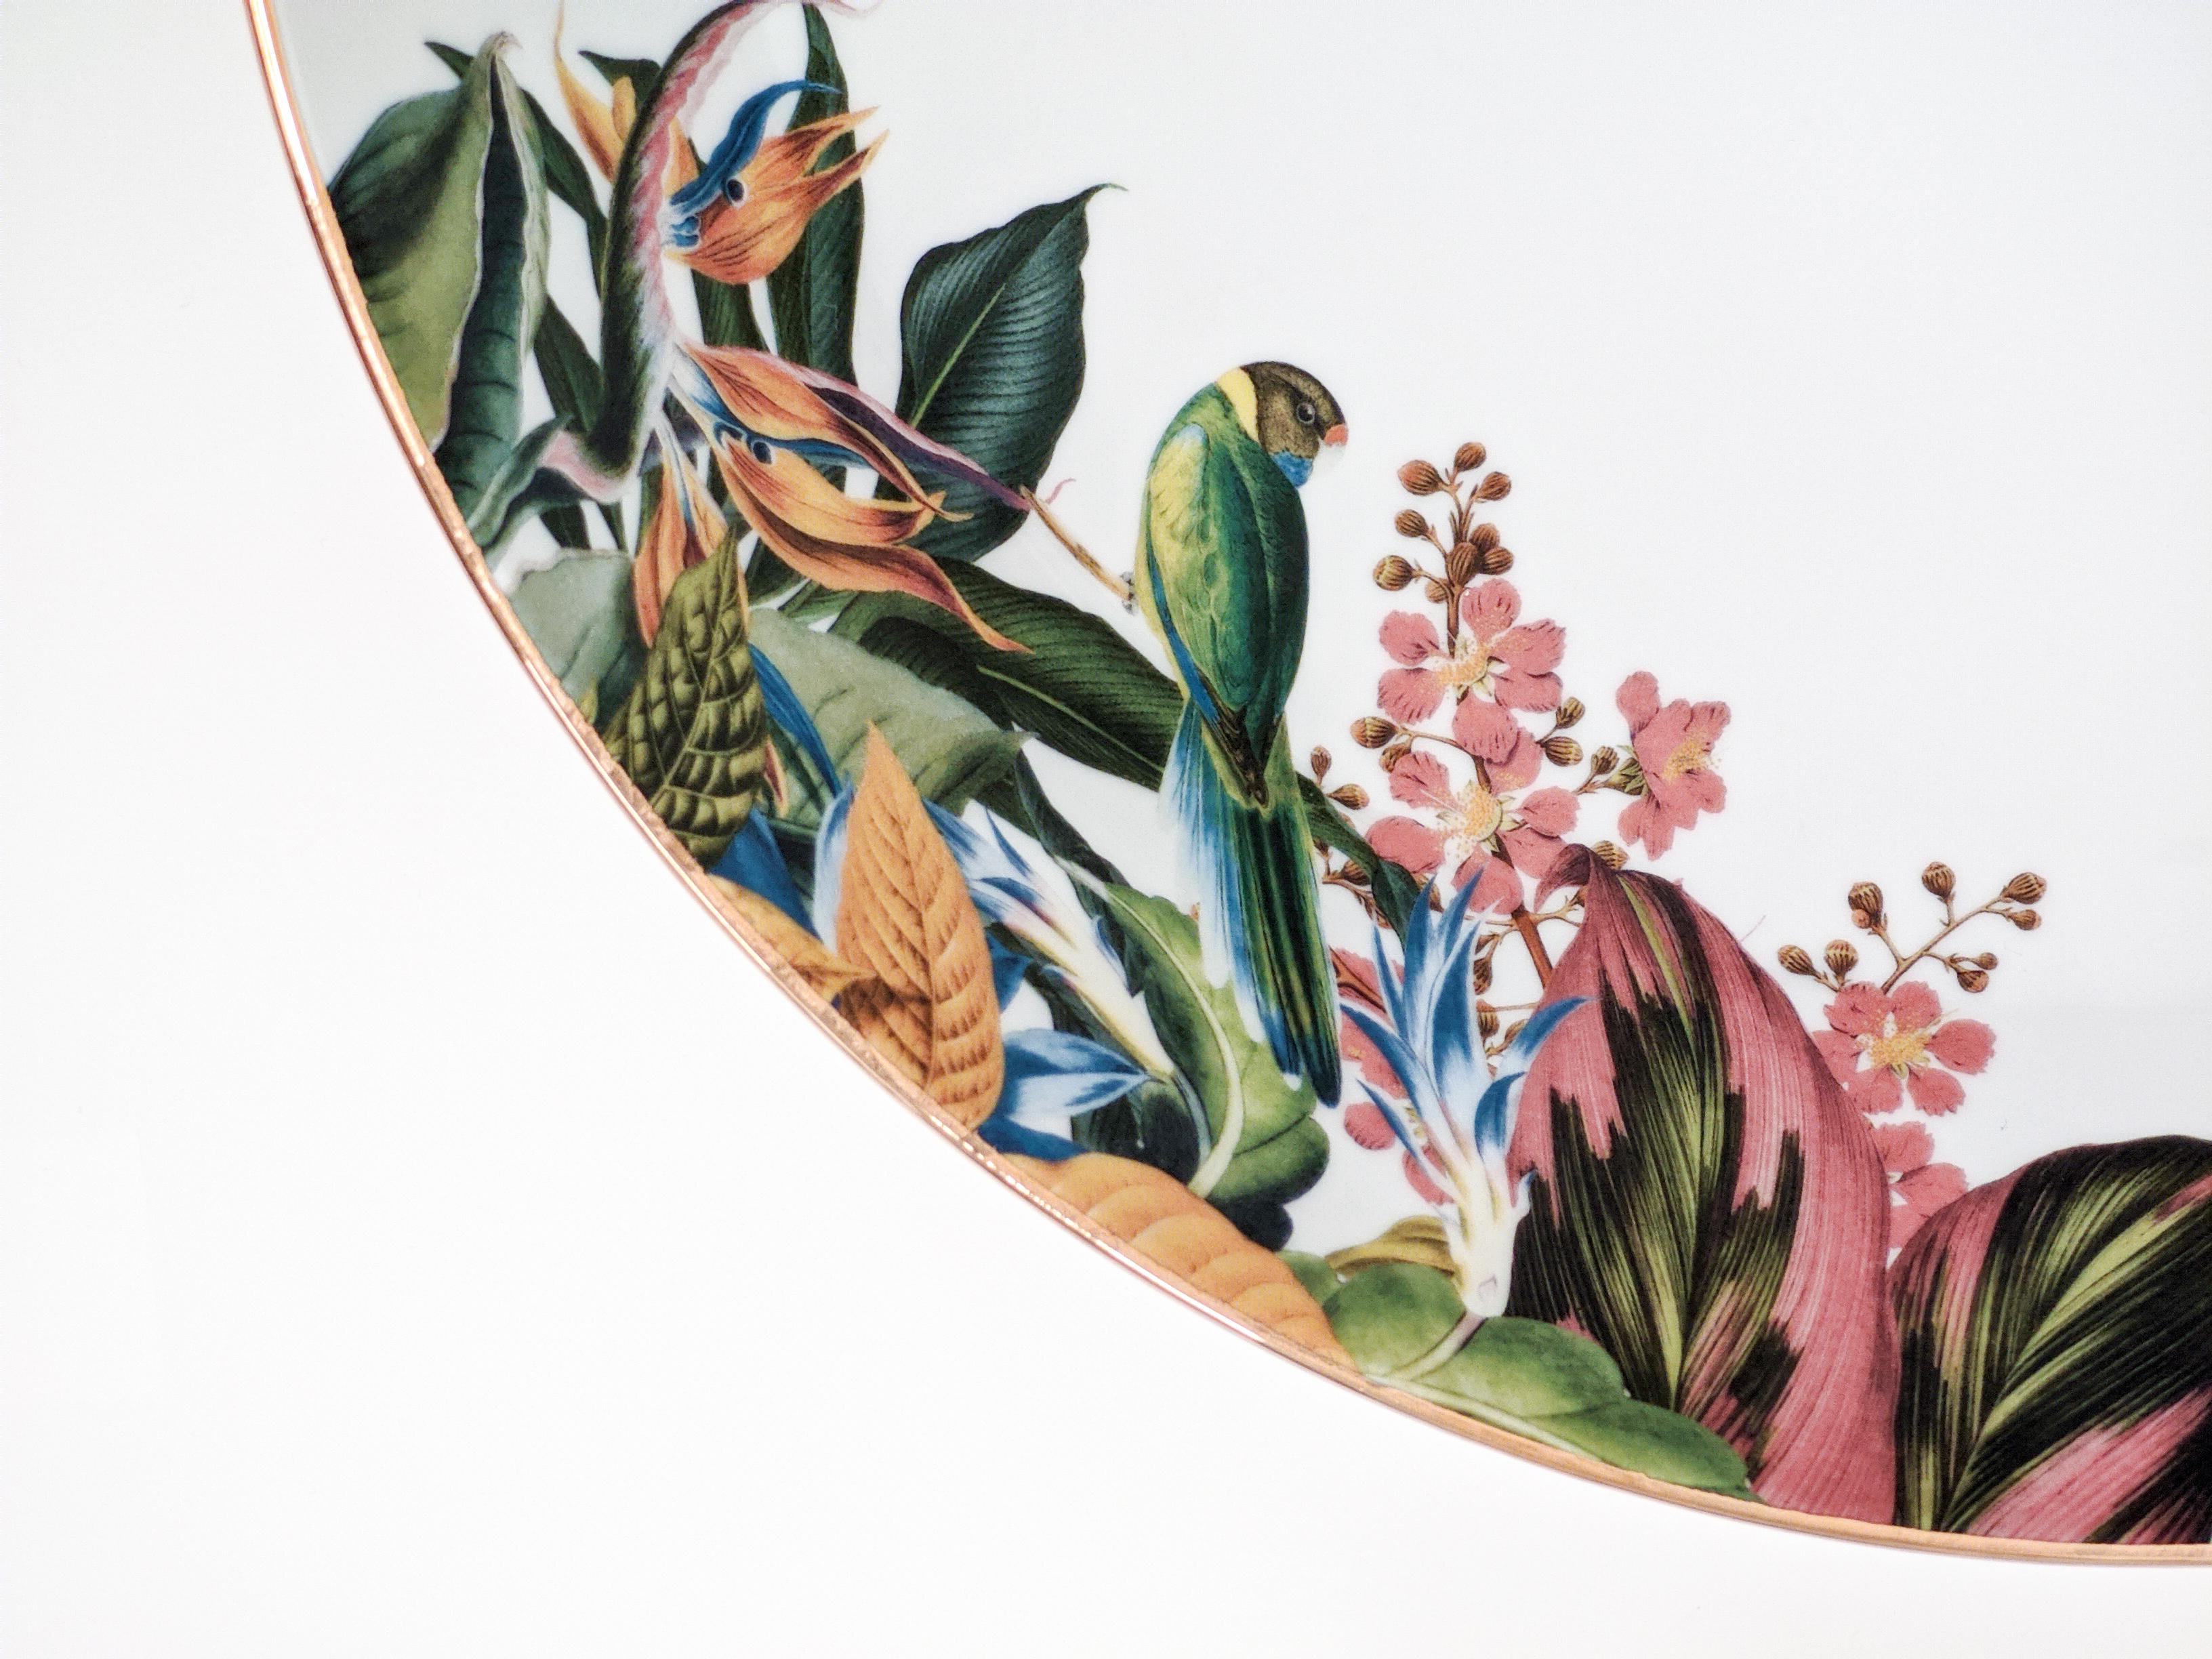 Other Animalia, Contemporary Decorated Porcelain Bowl Design by Vito Nesta  For Sale